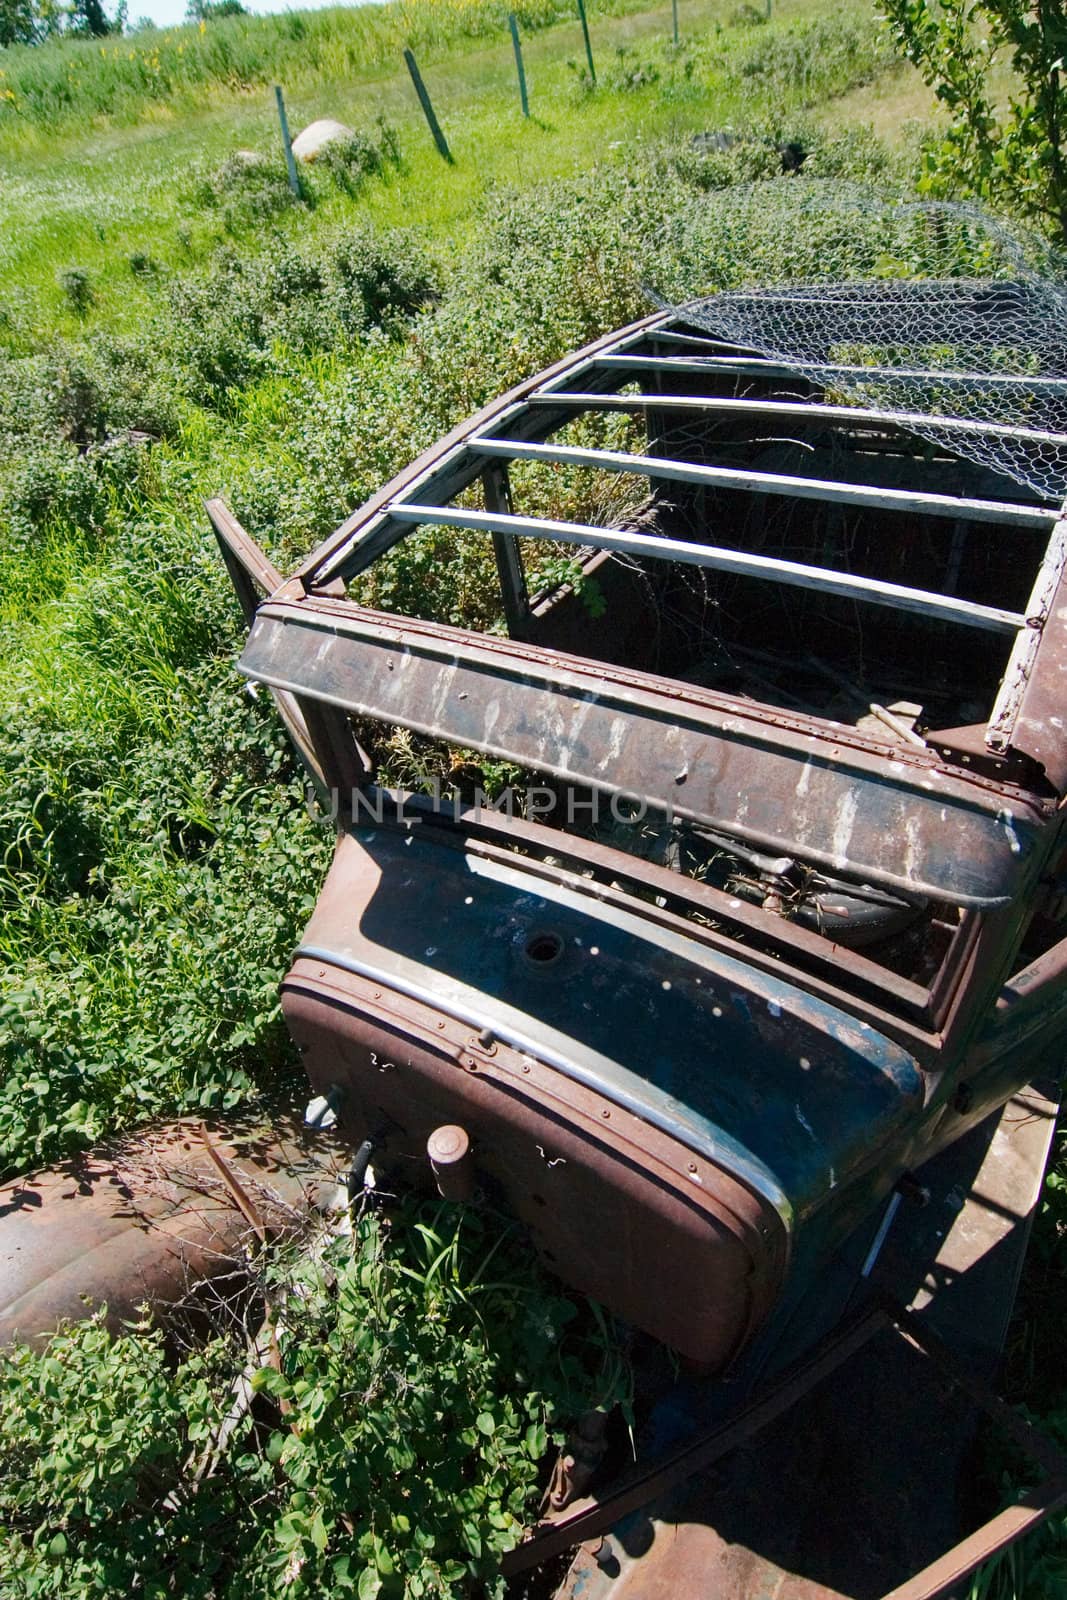 An old rusted out car on the prairie landscape